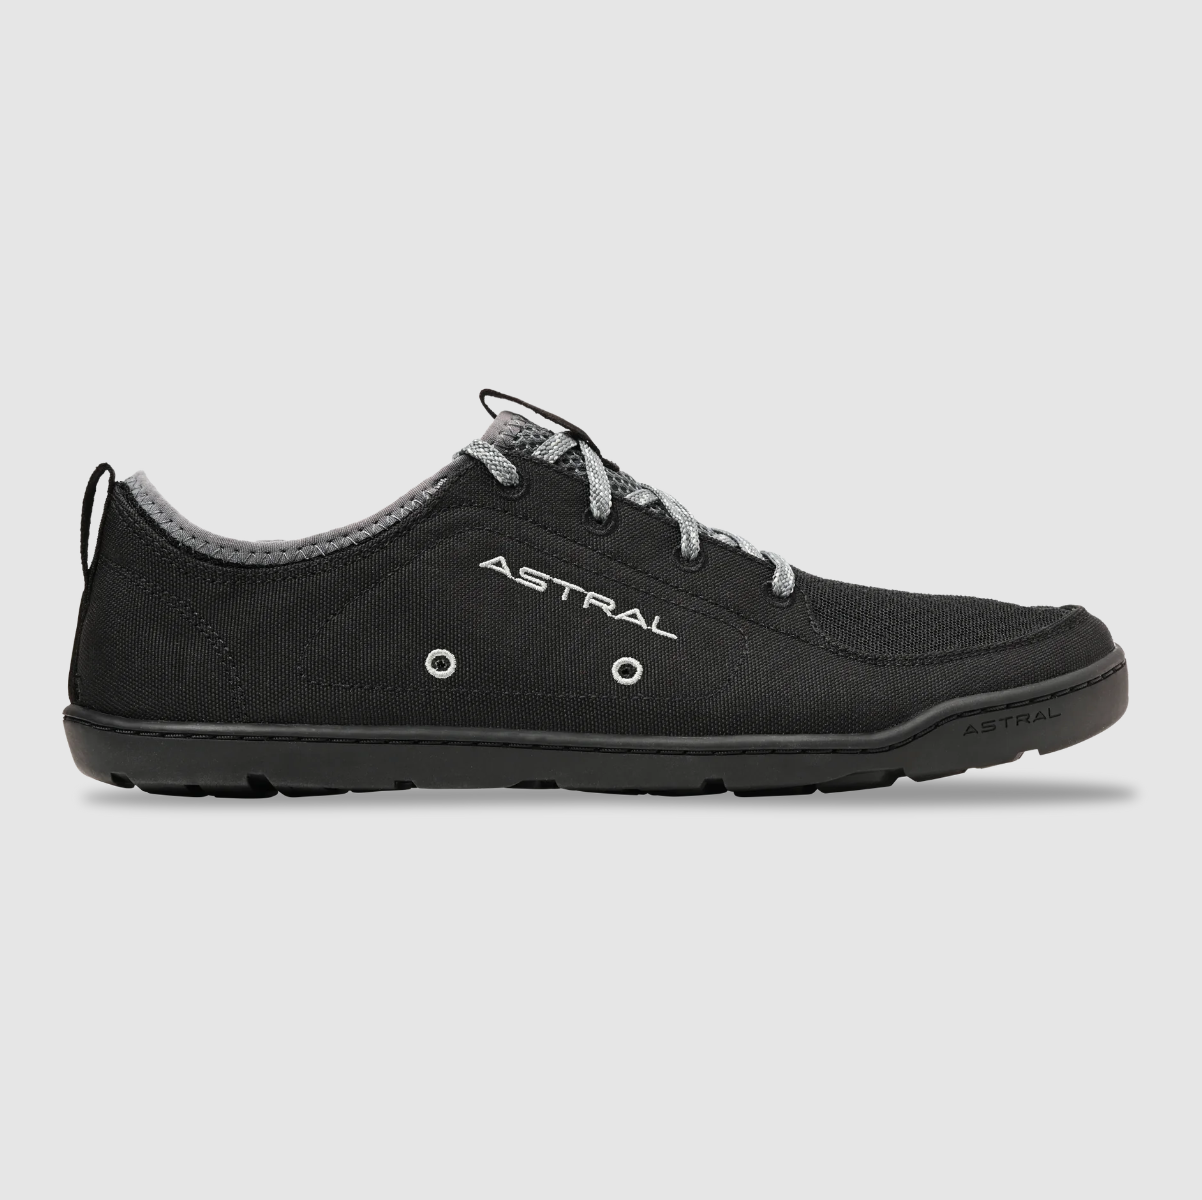 Astral Loyak Men's Shoe in Space Black Colour way. Side View Right Foot